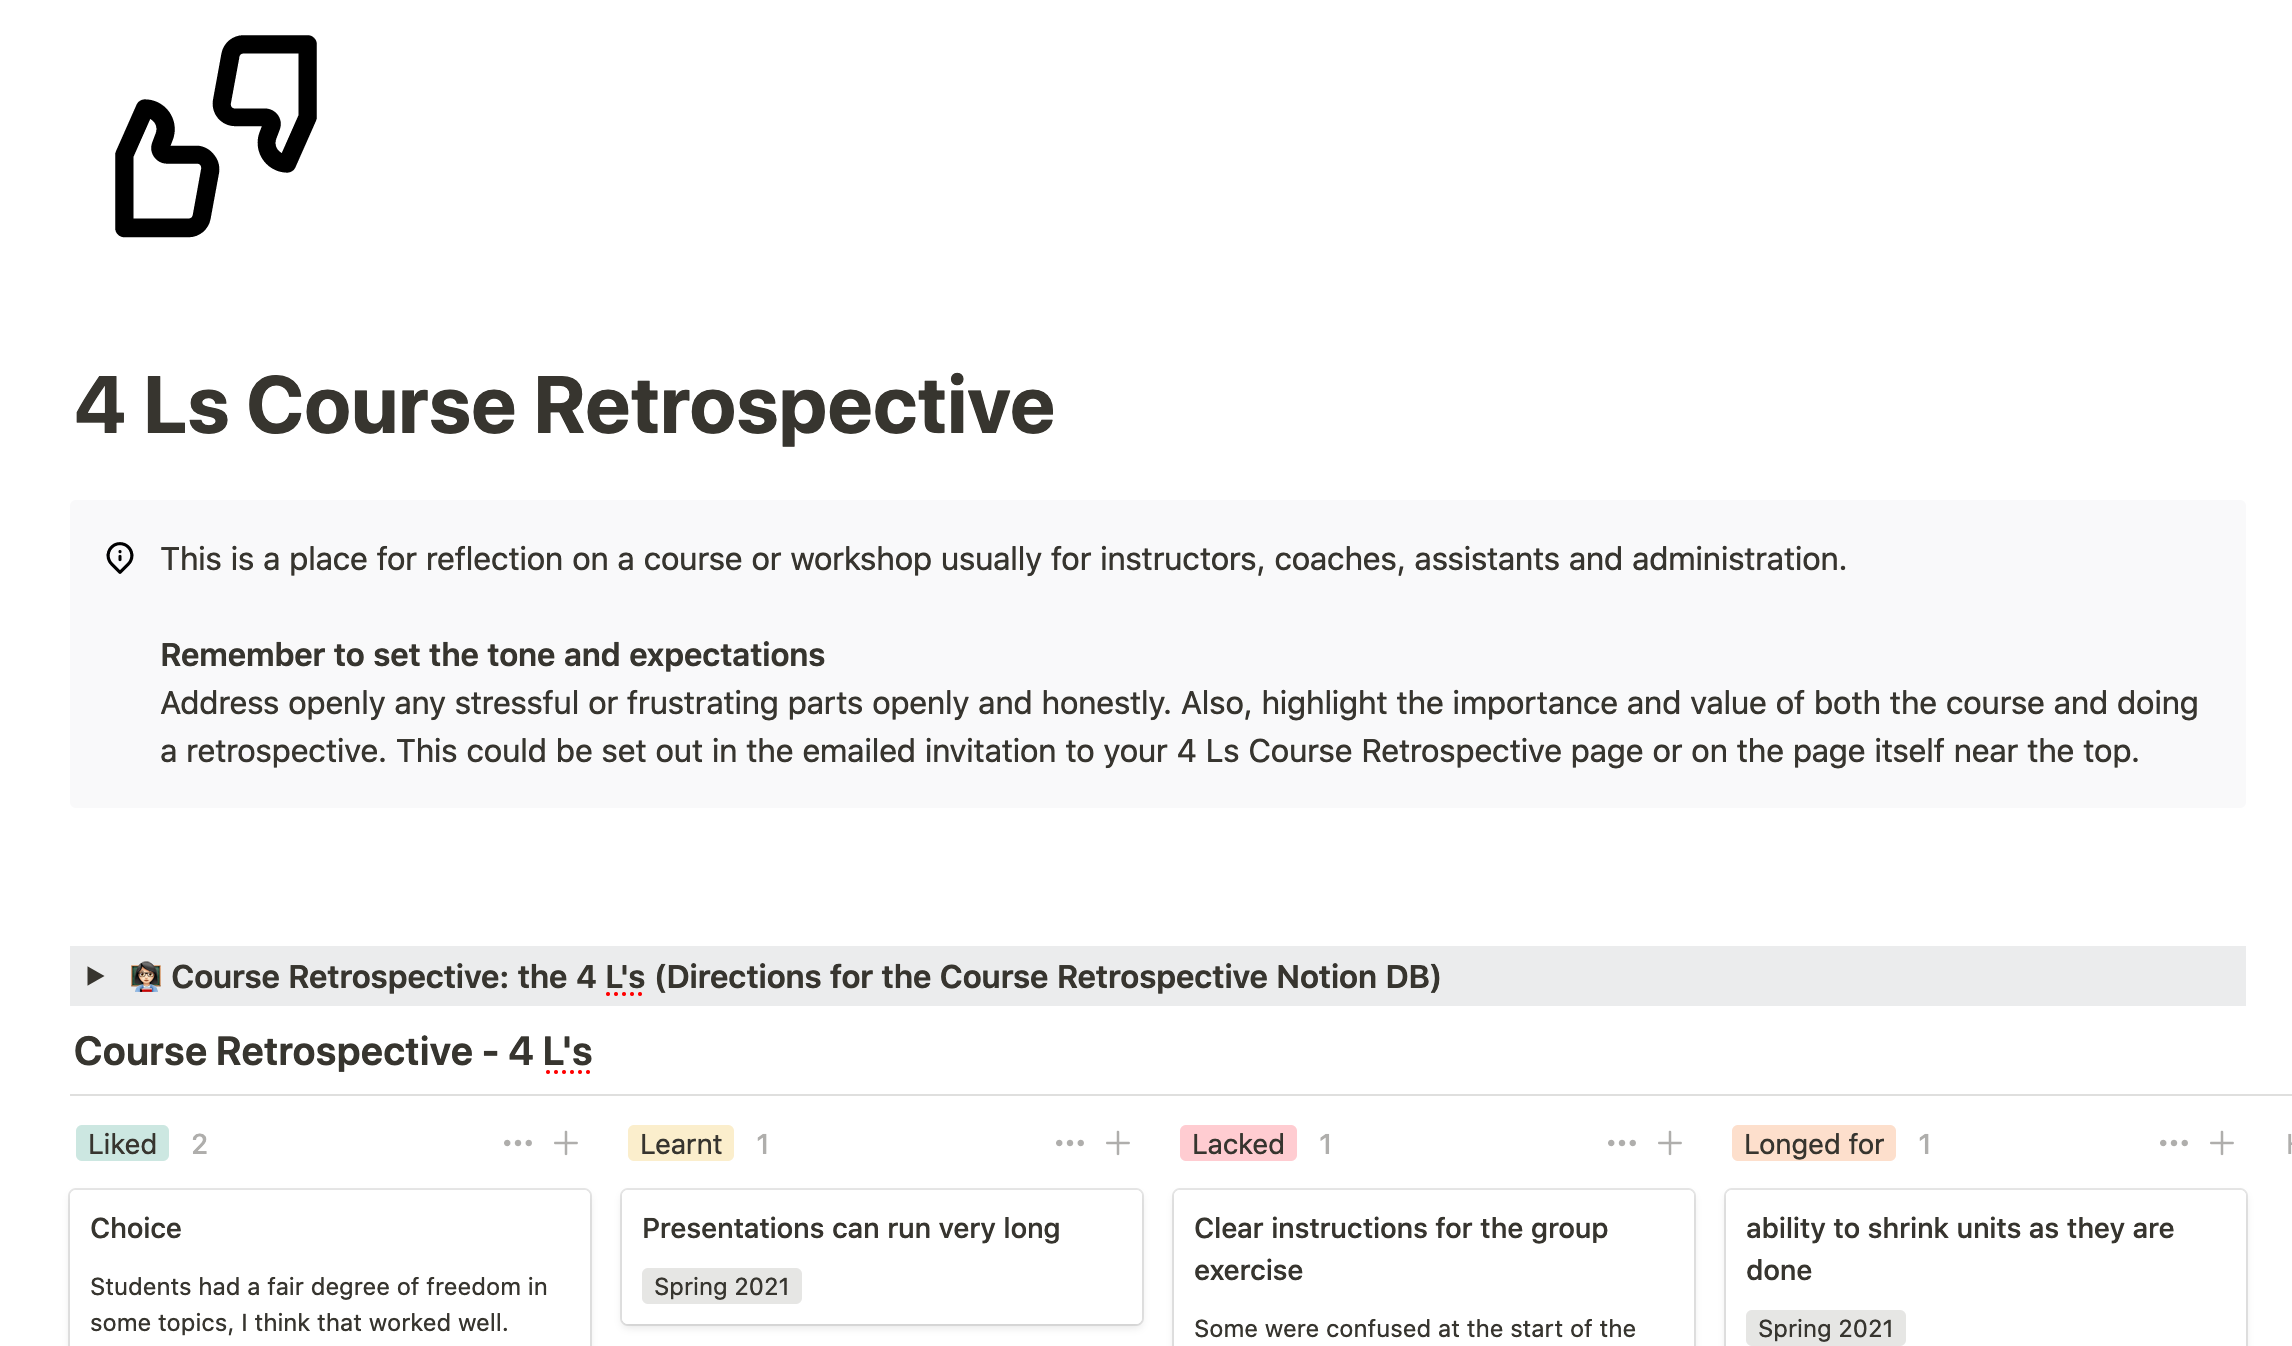 5 Steps to Run a Course Retrospective (and reasons why you should)